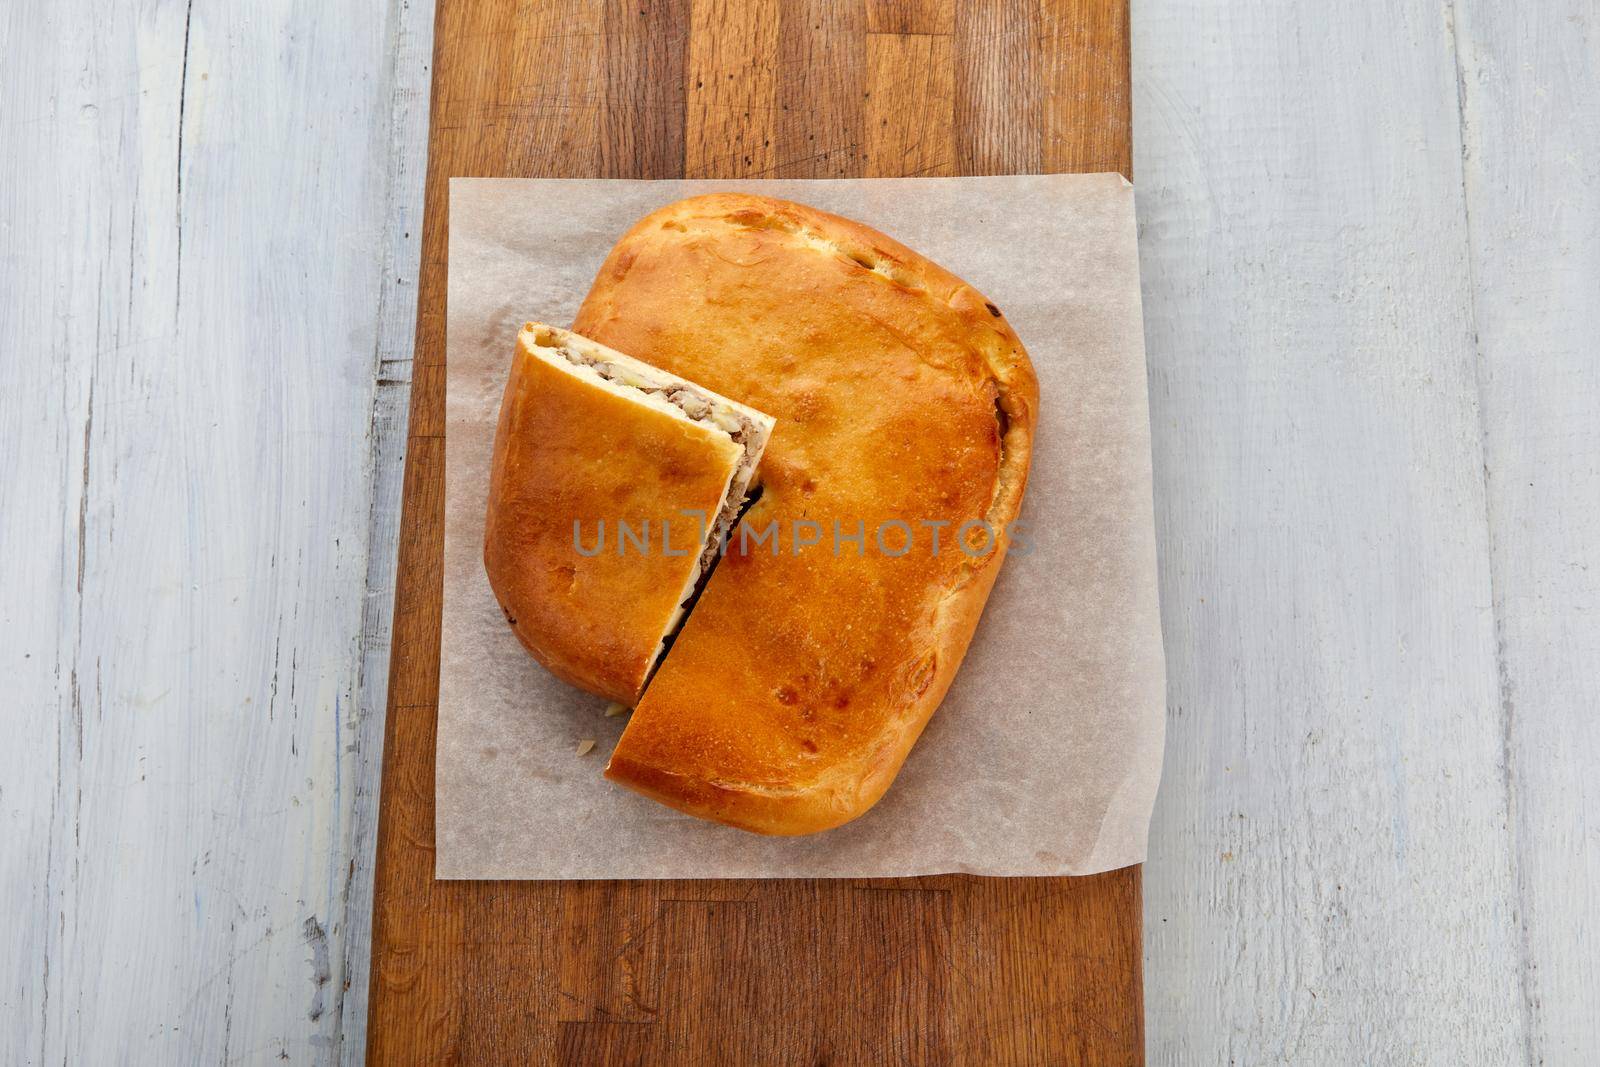 From above yummy cut meat pie served on parchment on lumber chopping board on table